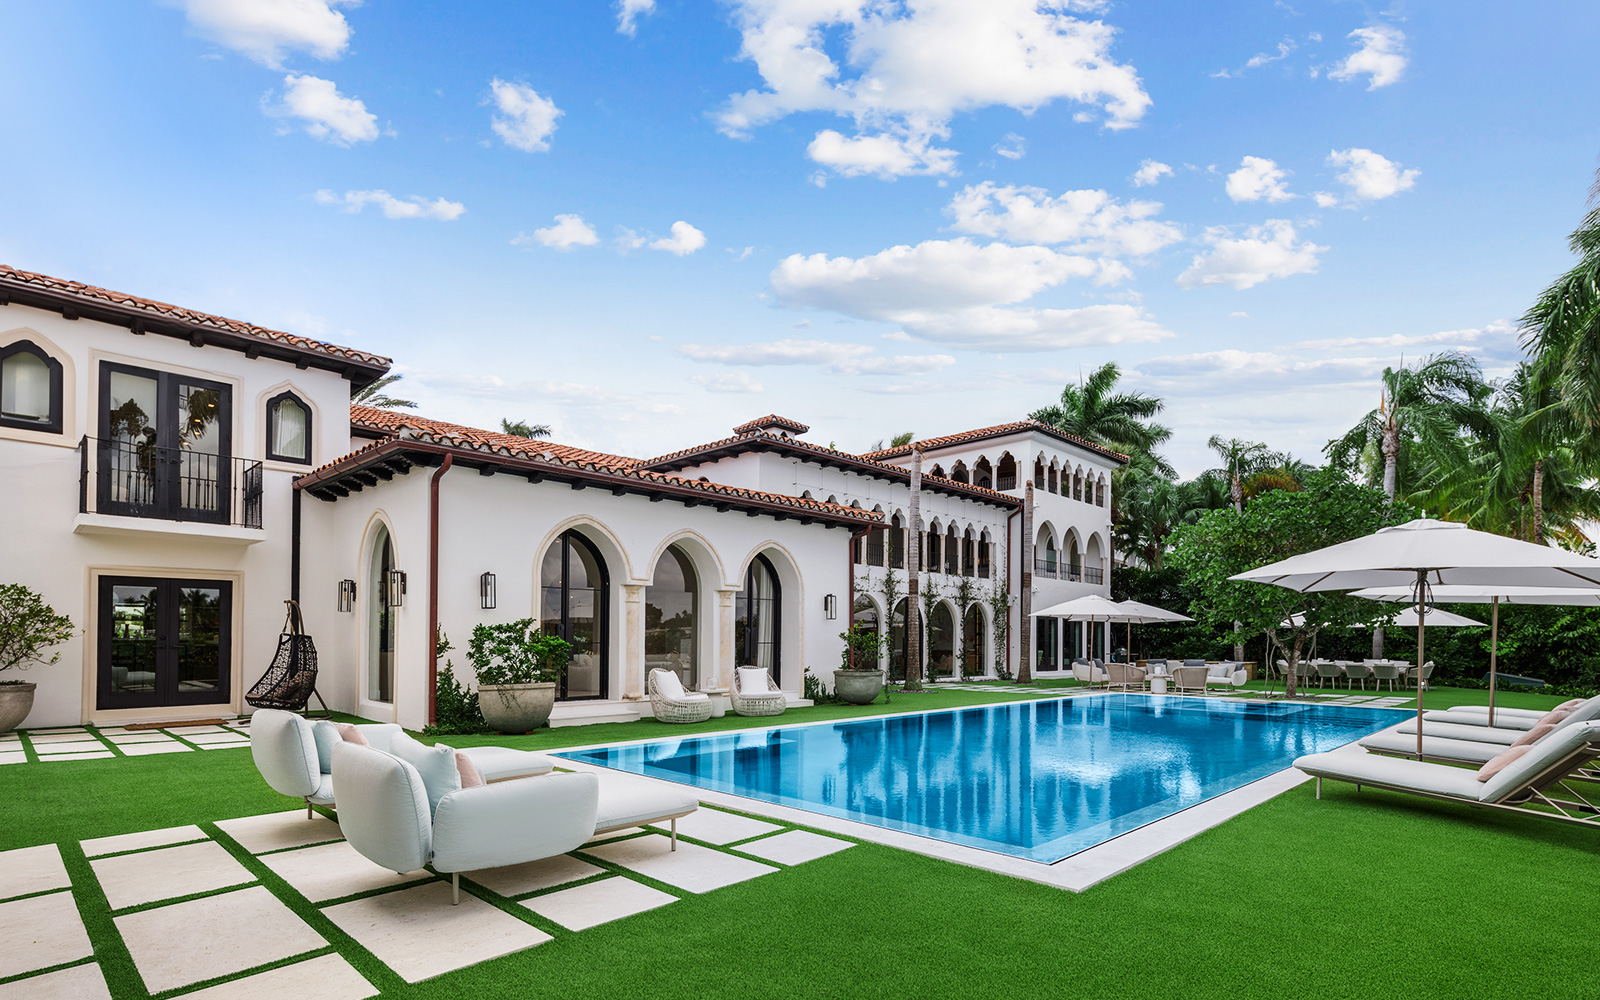 Brent Saunders Buys Cher’s Former Miami Beach Mansion